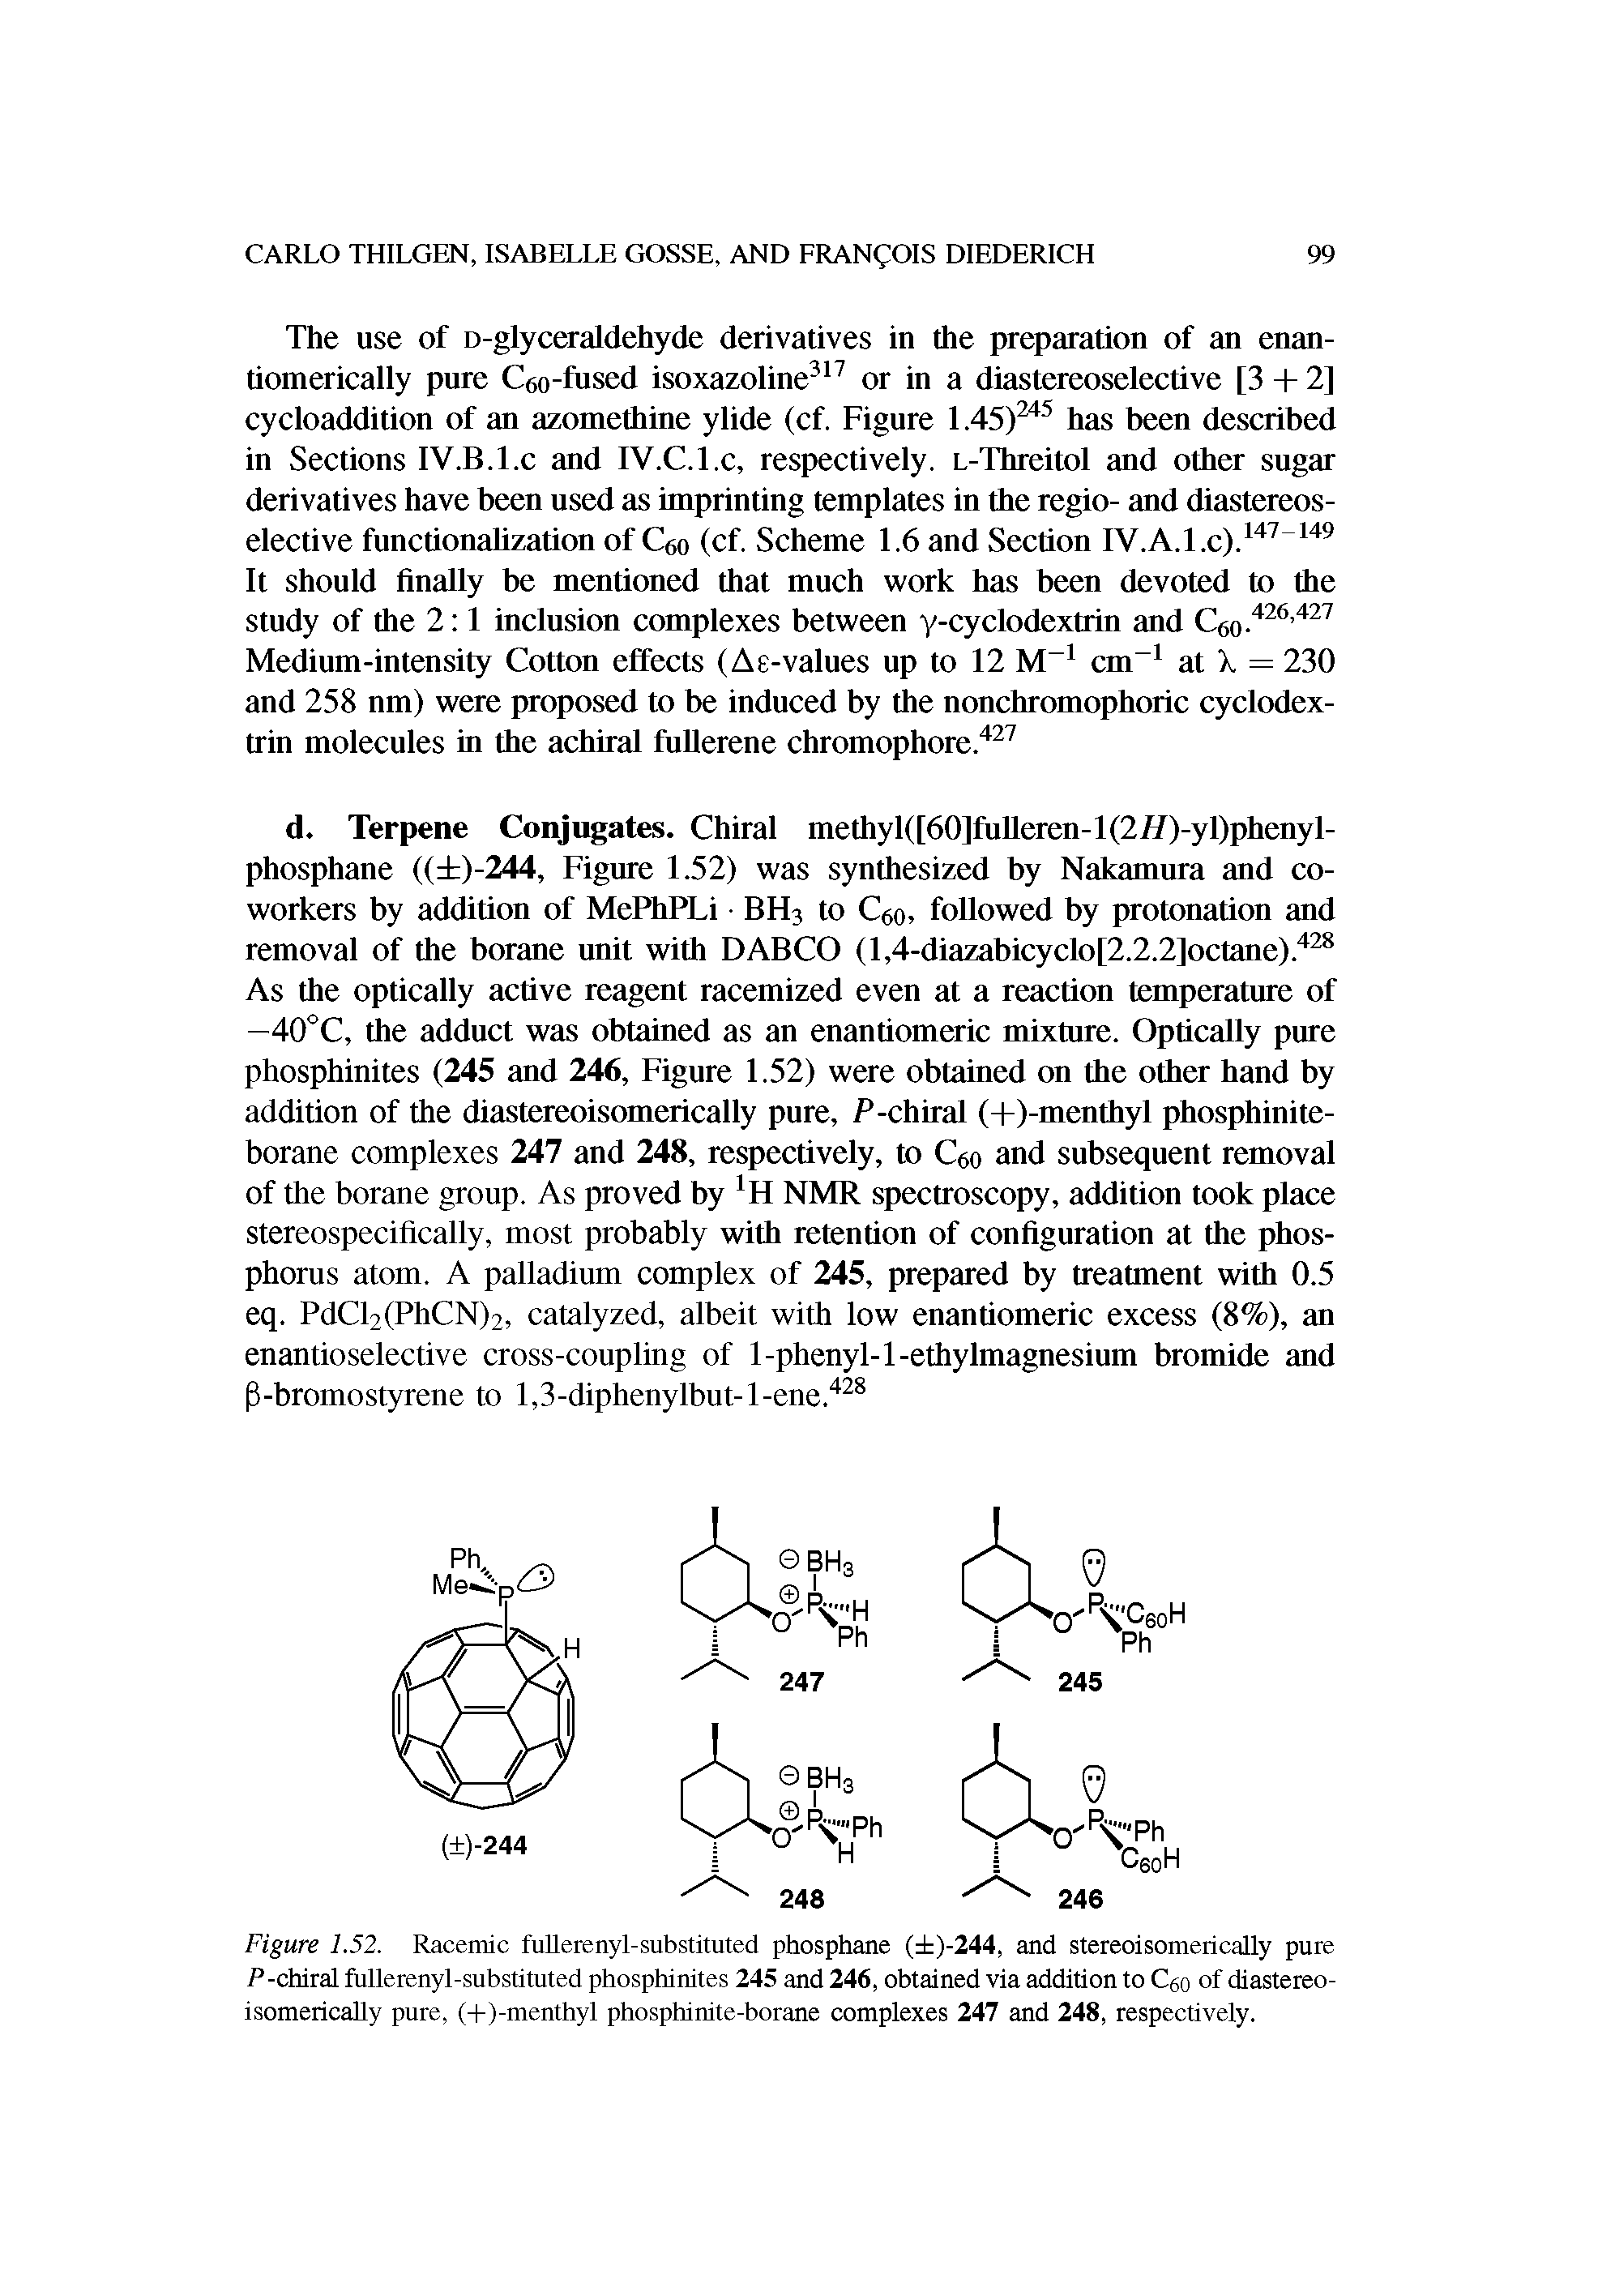 Figure 1.52. Racemic fullerenyl-substituted phosphane ( )-244, and stereoisomerically pure P-chiral fullerenyl-substituted phosphinites 245 and 246, obtained via addition to Cgo of diastereoisomerically pure, (+)-menthyl phosphinite-borane complexes 247 and 248, respectively.